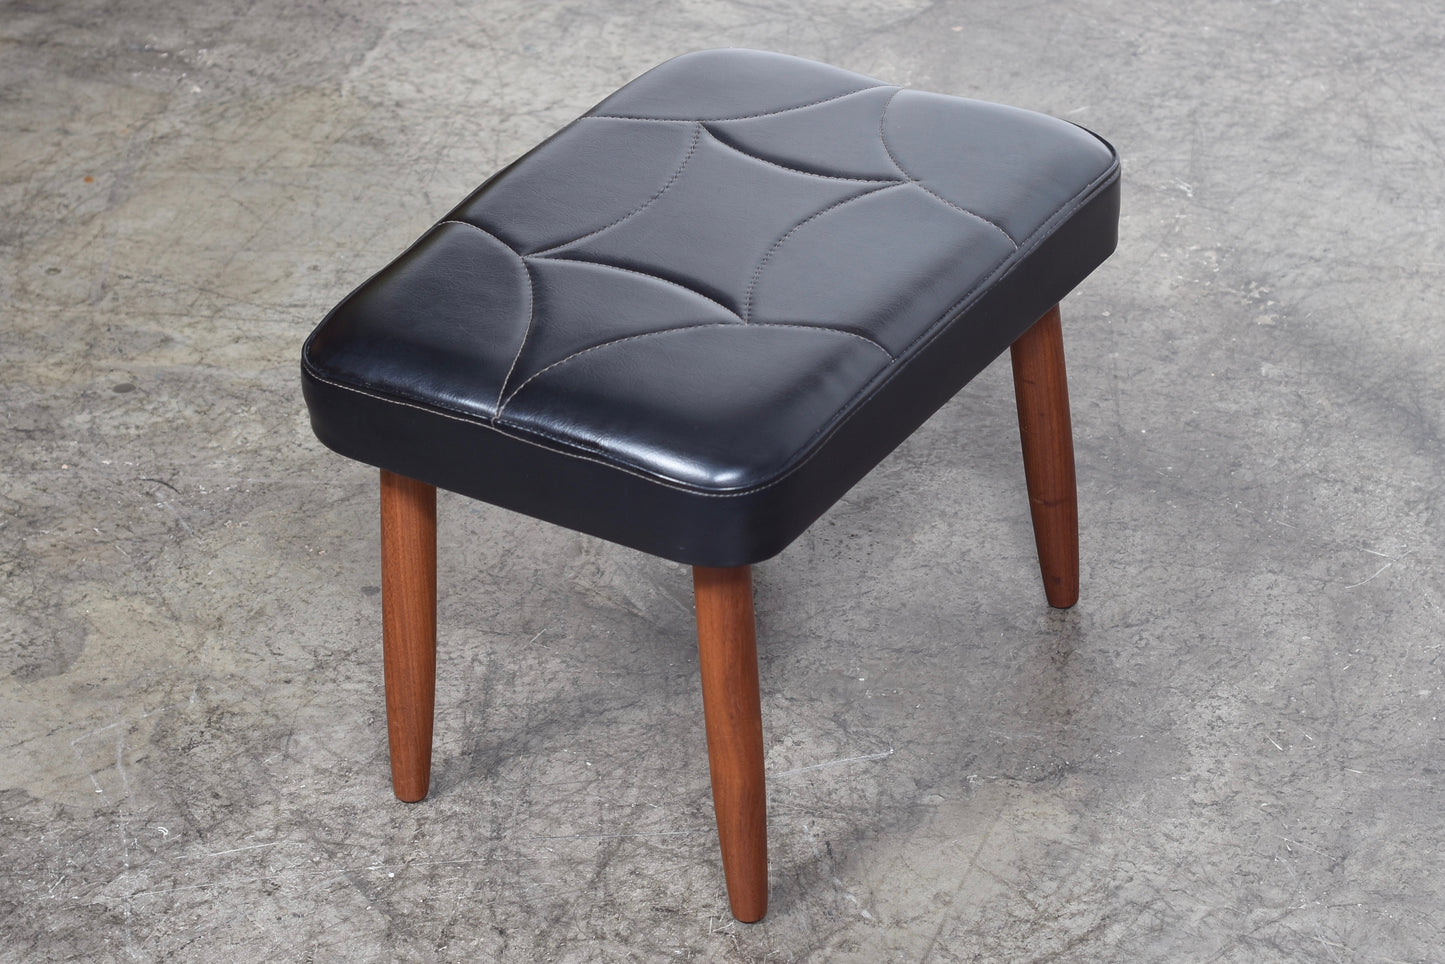 Two available: Skai foot stool with teak legs